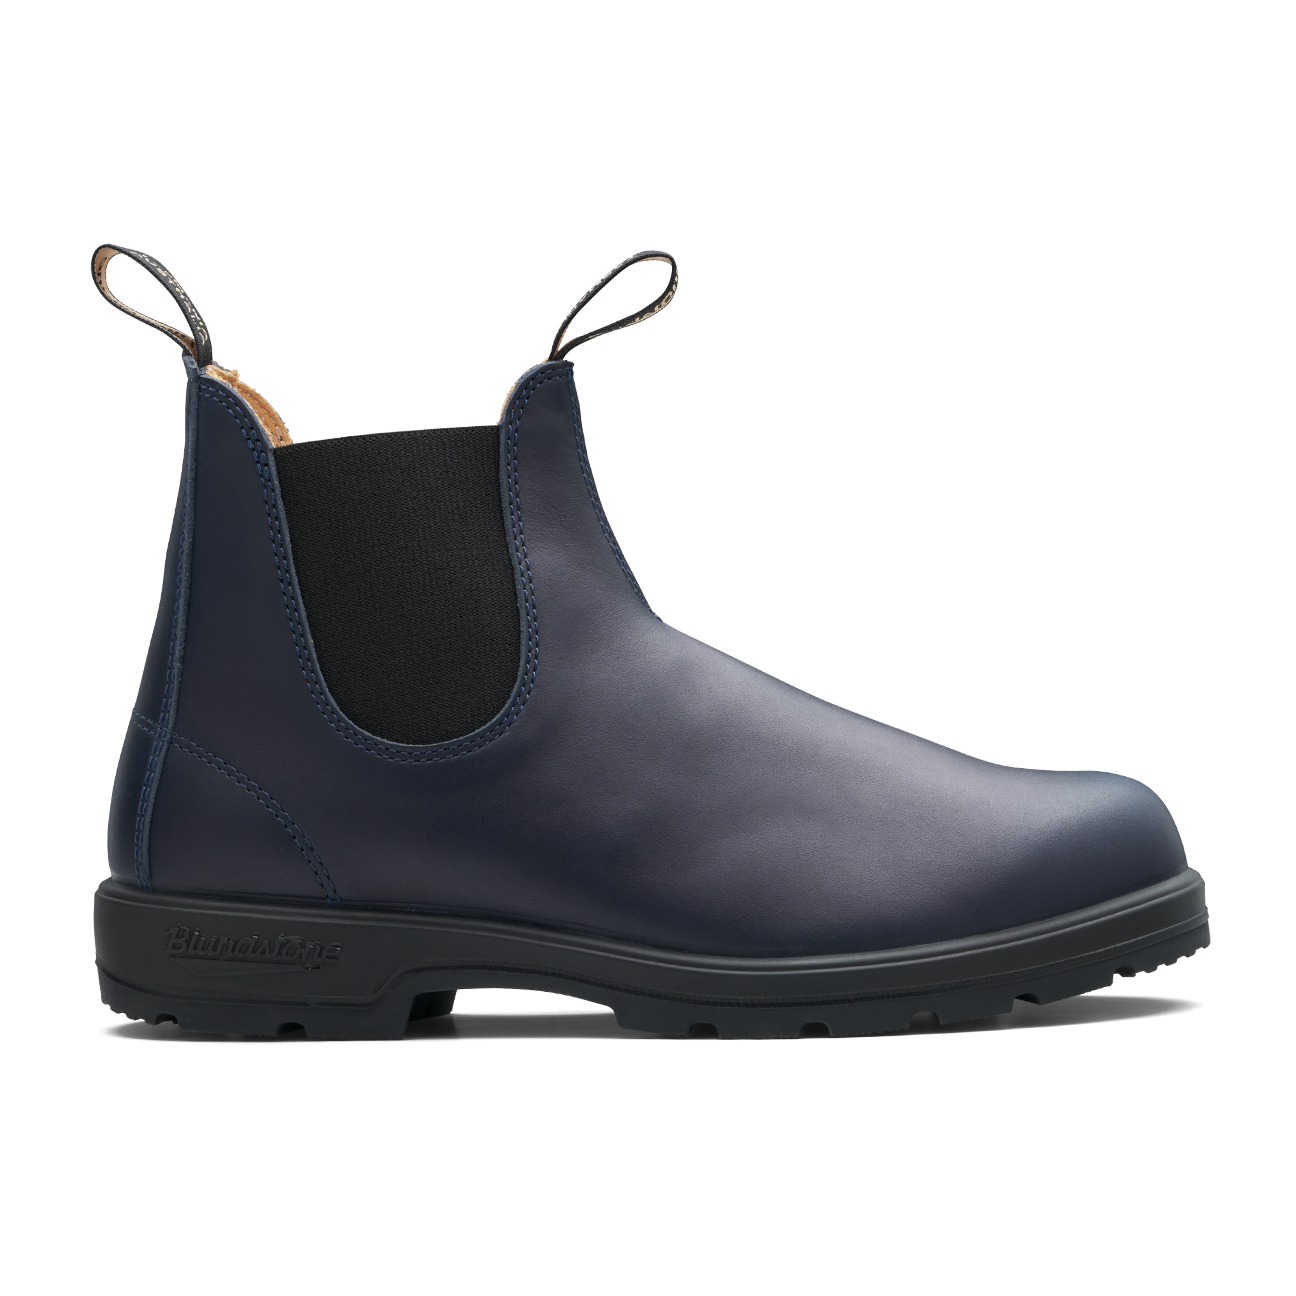 Blundstone #2246 Classic boot navy blue side